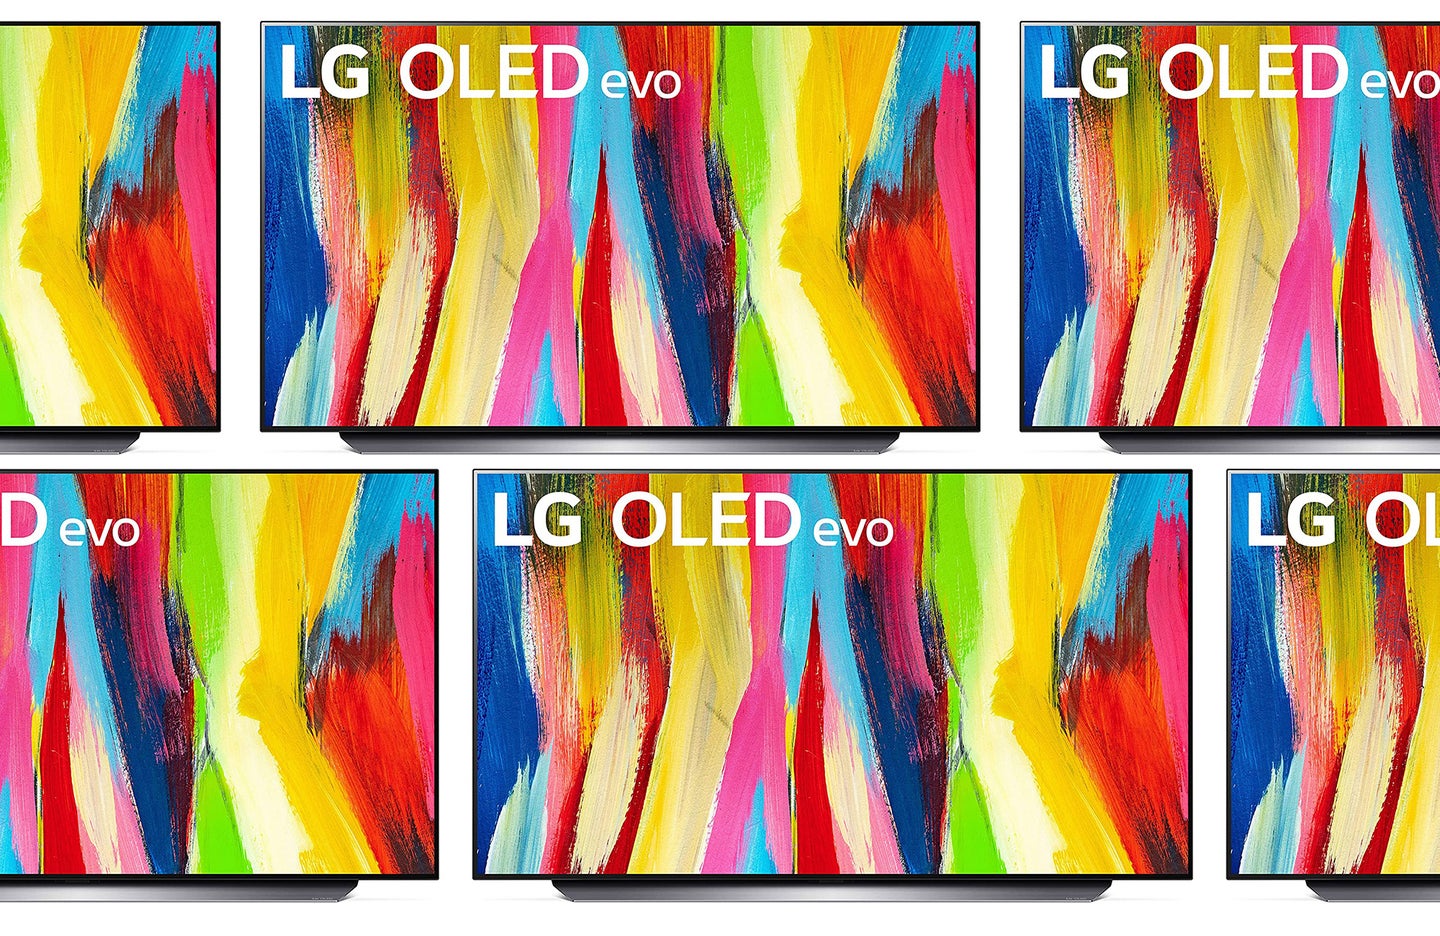 LG C2 TVs in a grid with a colorful pattern on the screen.